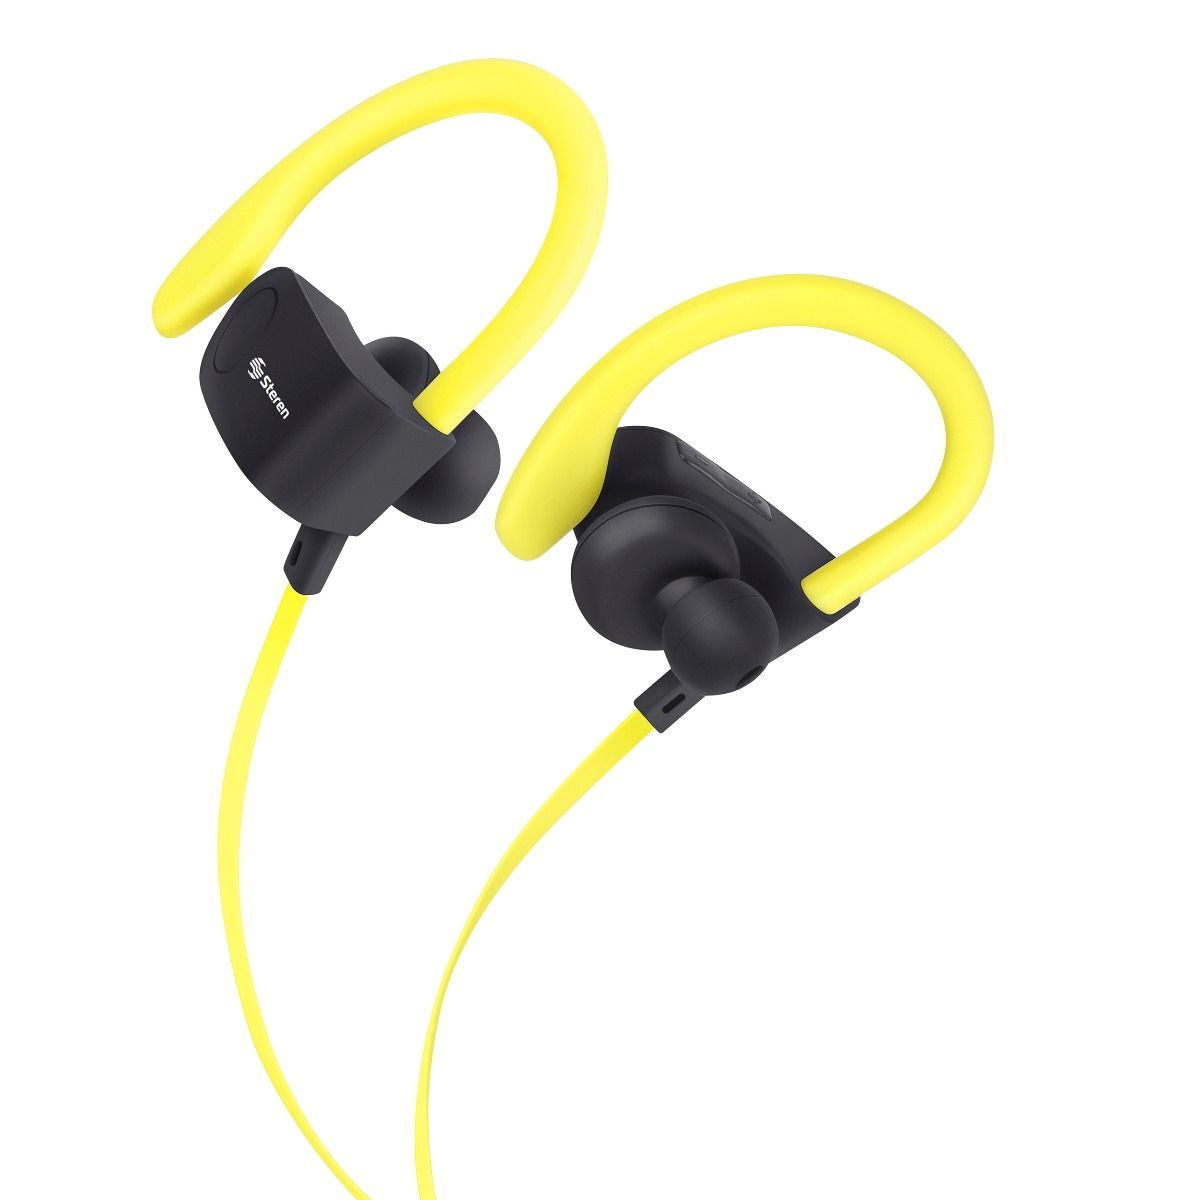 Auriculares Deportivos Bluetooth sin Cables Micro USB Movil Sport